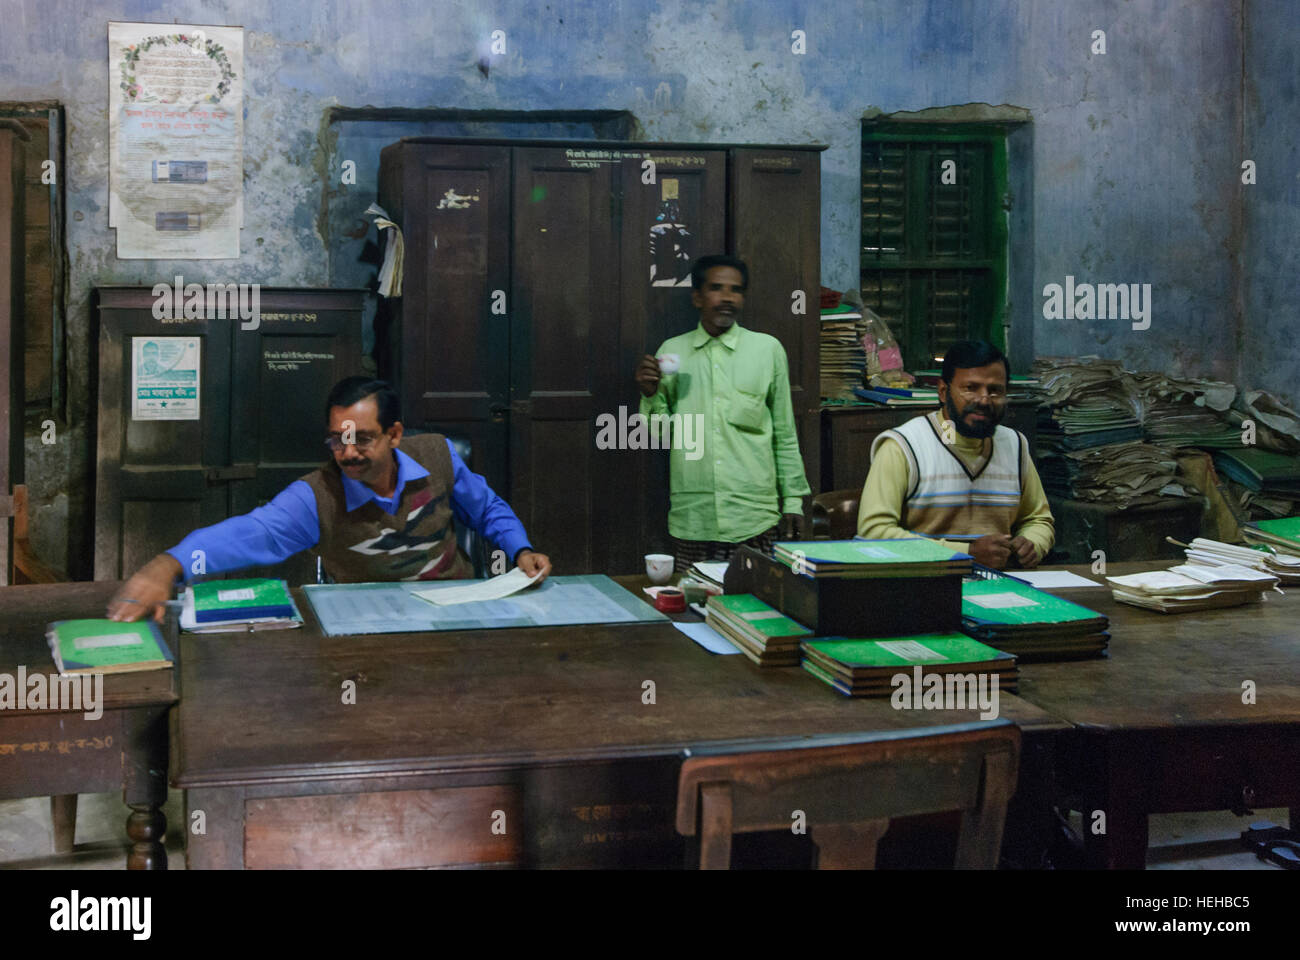 Barisal: Freight office of the state owned 'Rocket' shipping company, Barisal Division, Bangladesh Stock Photo